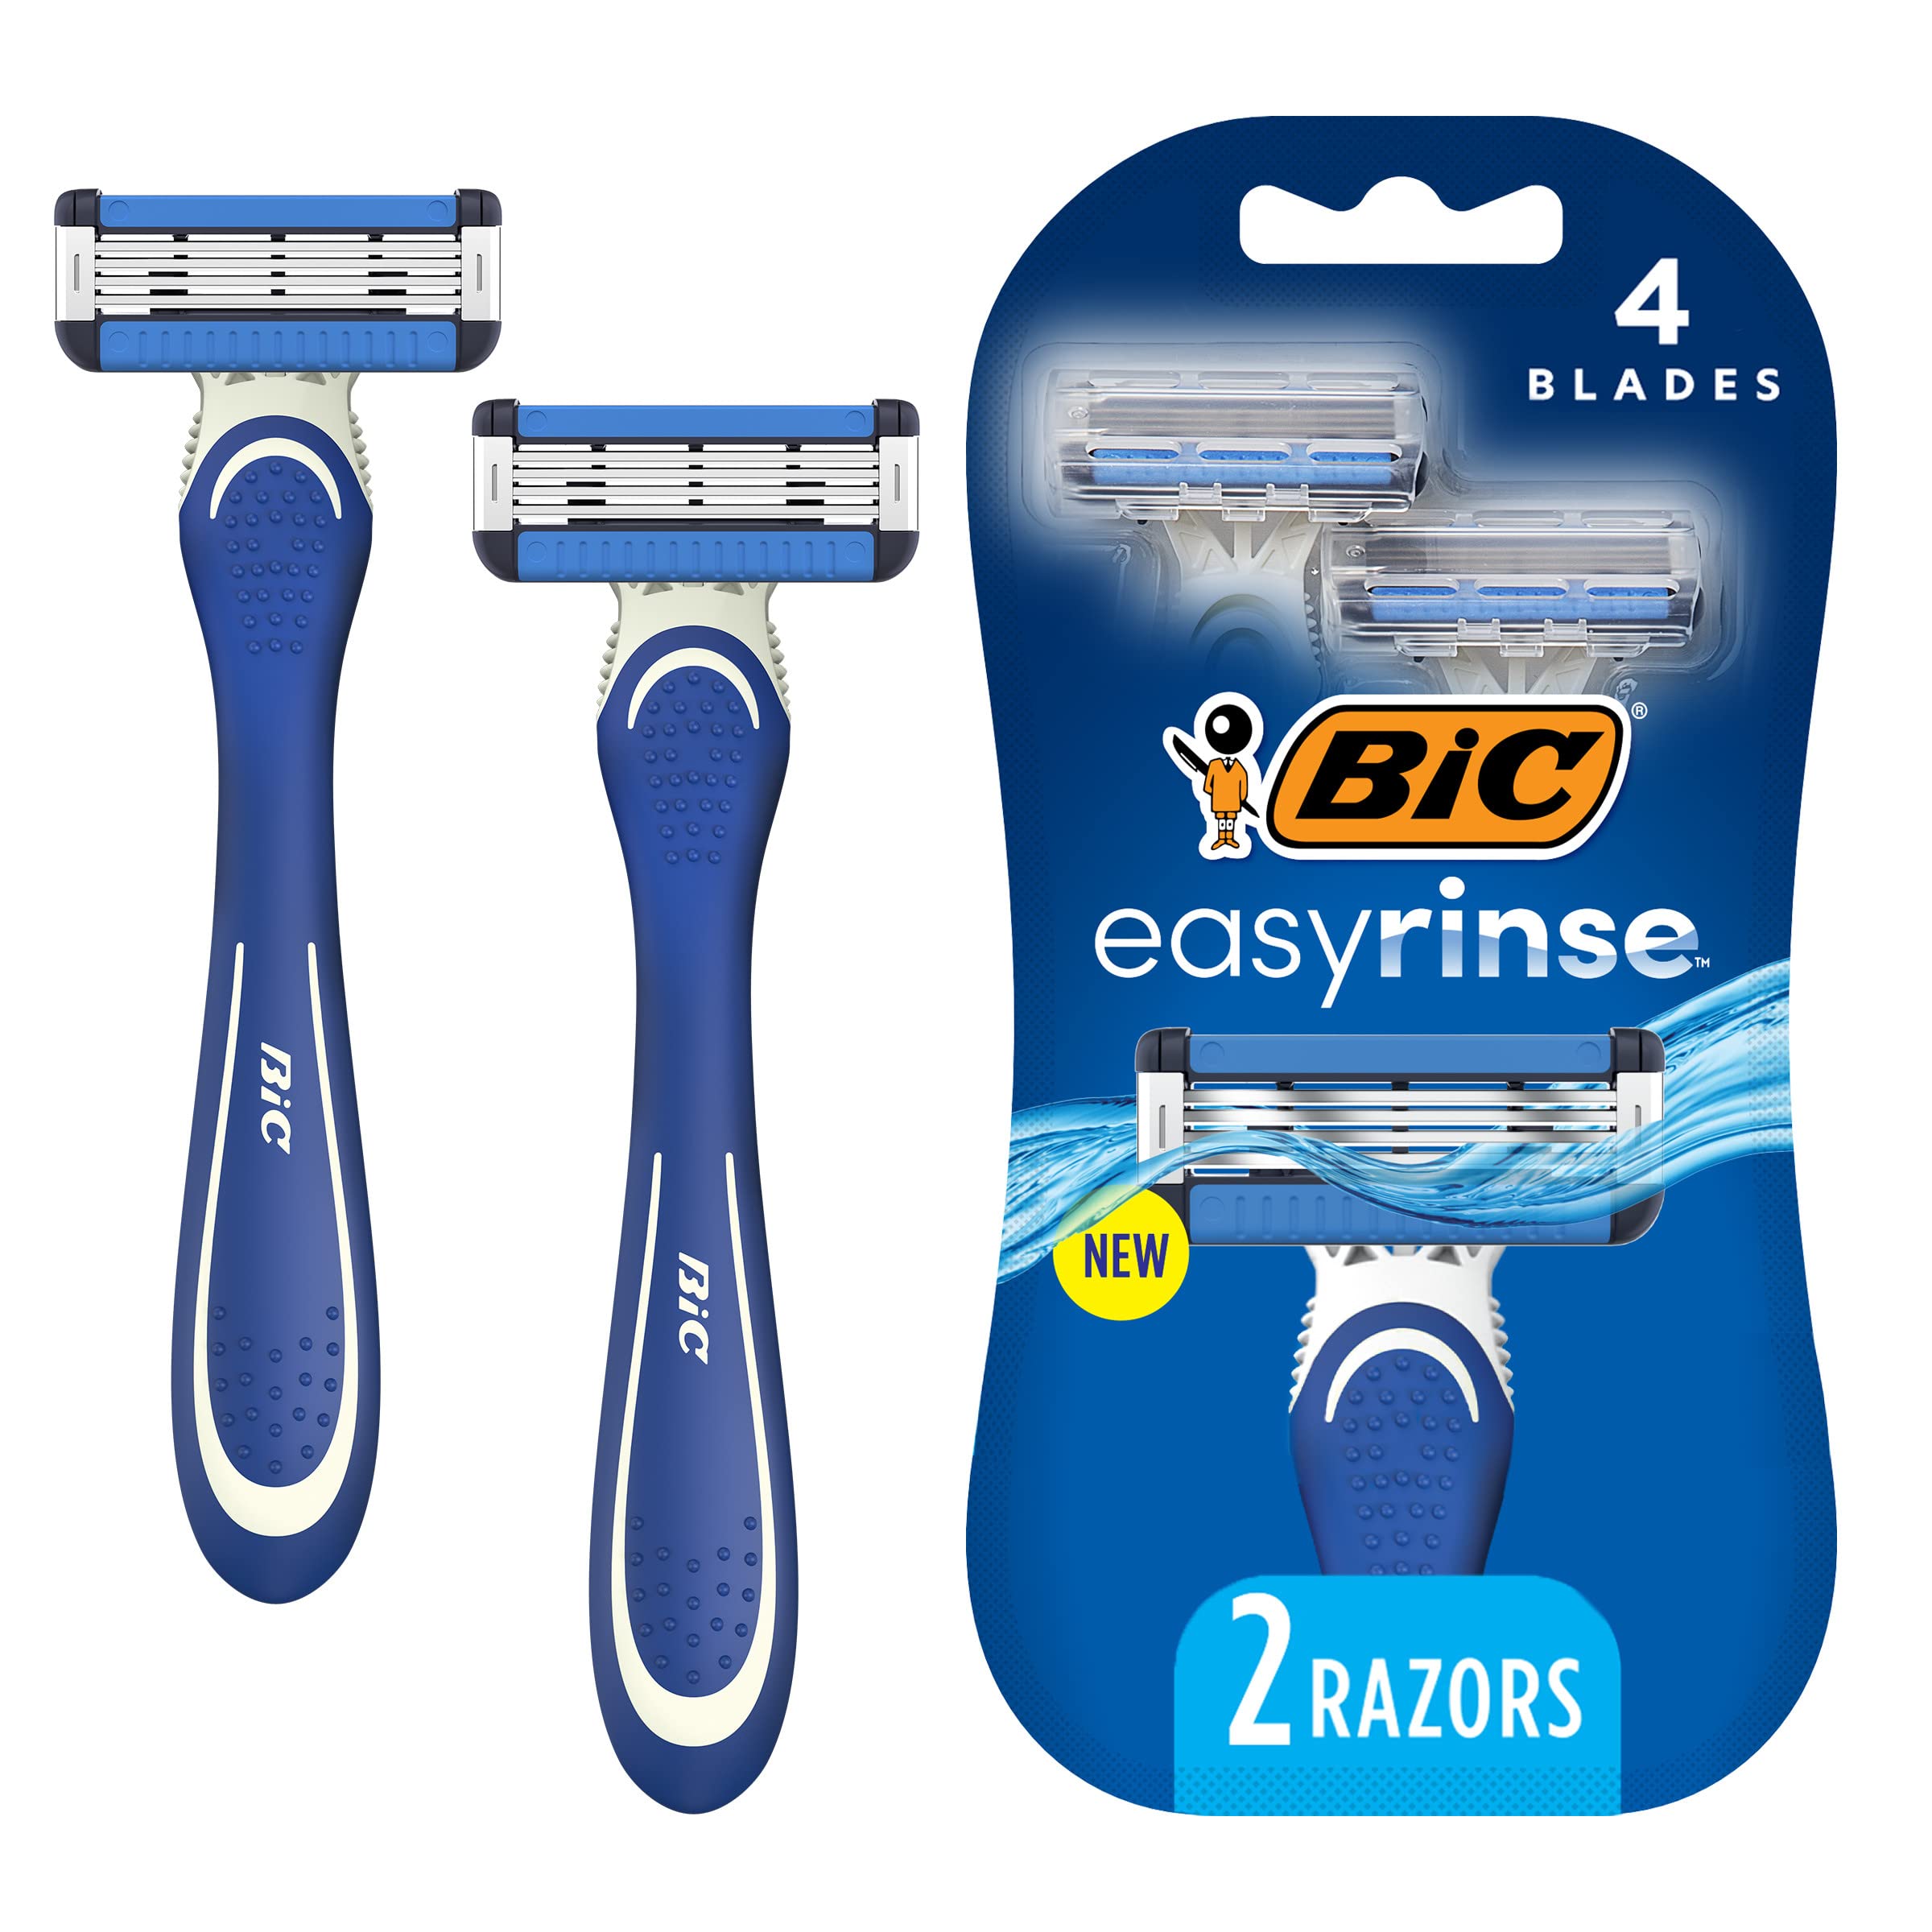 BIC EasyRinse Anti-Clogging Men's Disposable Razors for a Smoother Shave With Less Irritation*, Easy Rinse Shaving Razors With 4 Blades, 2 Count $3.14